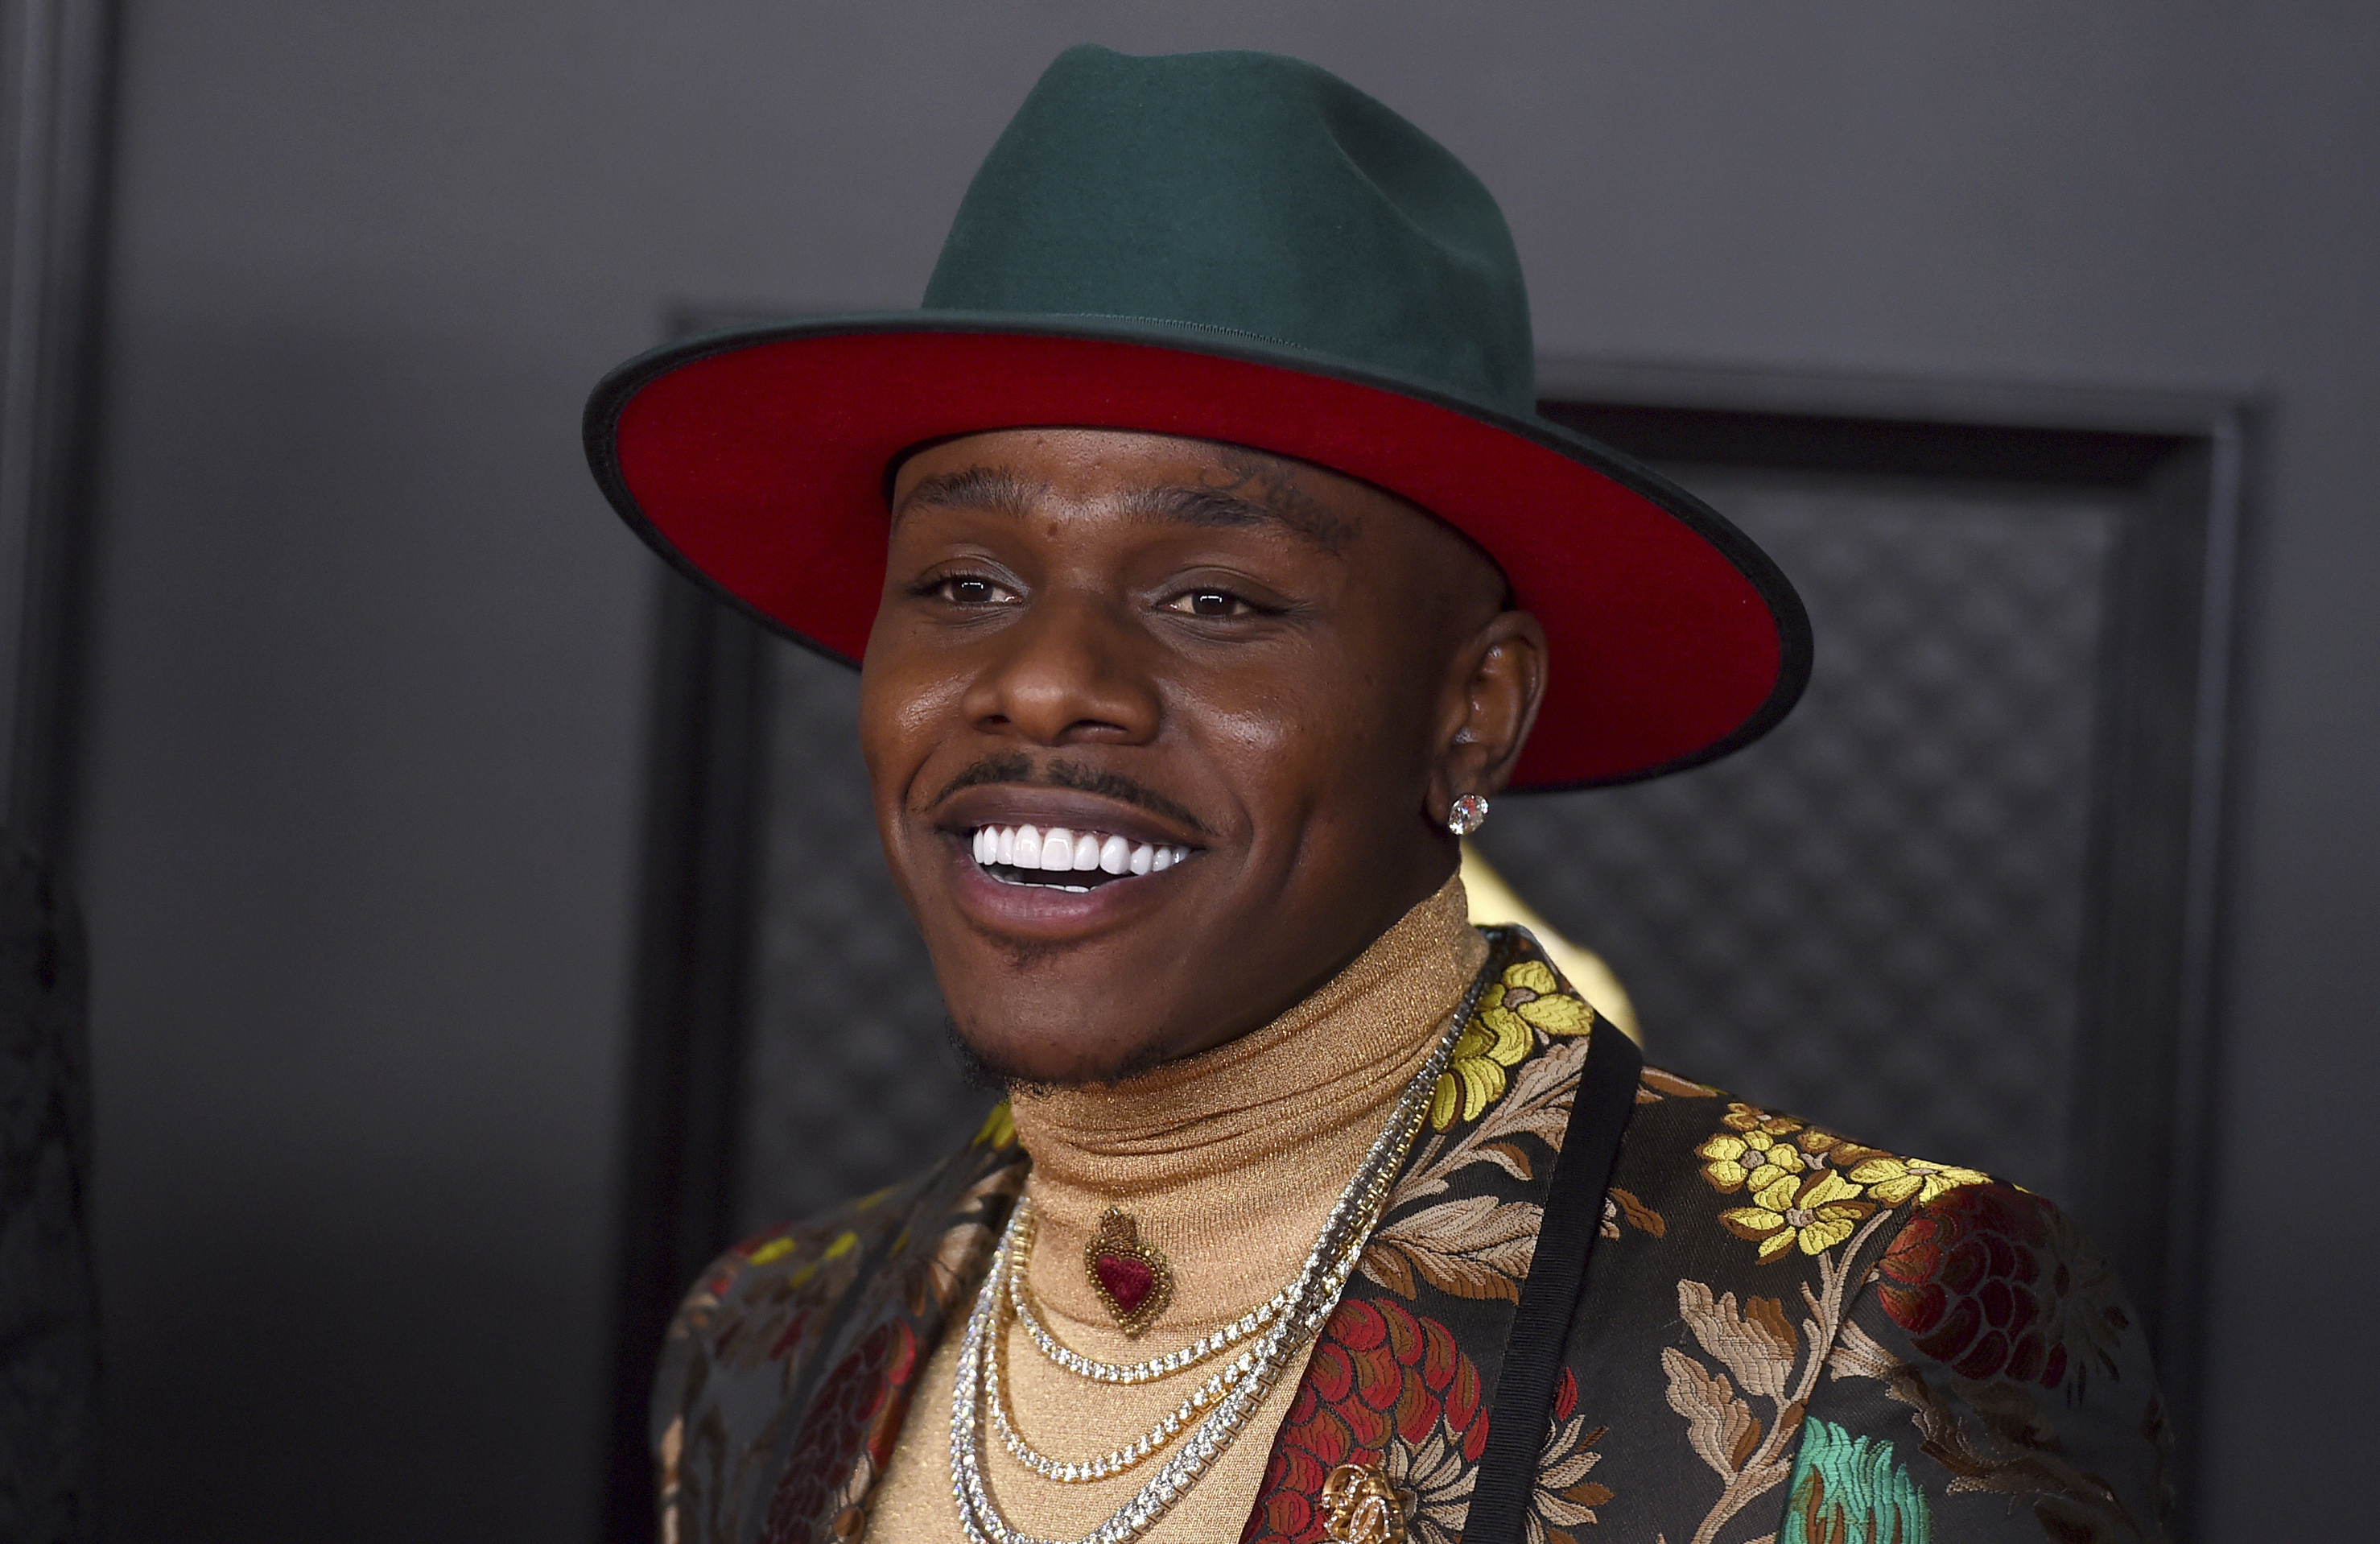 Dababy: Find The Latest Dababy Stories, News & Features